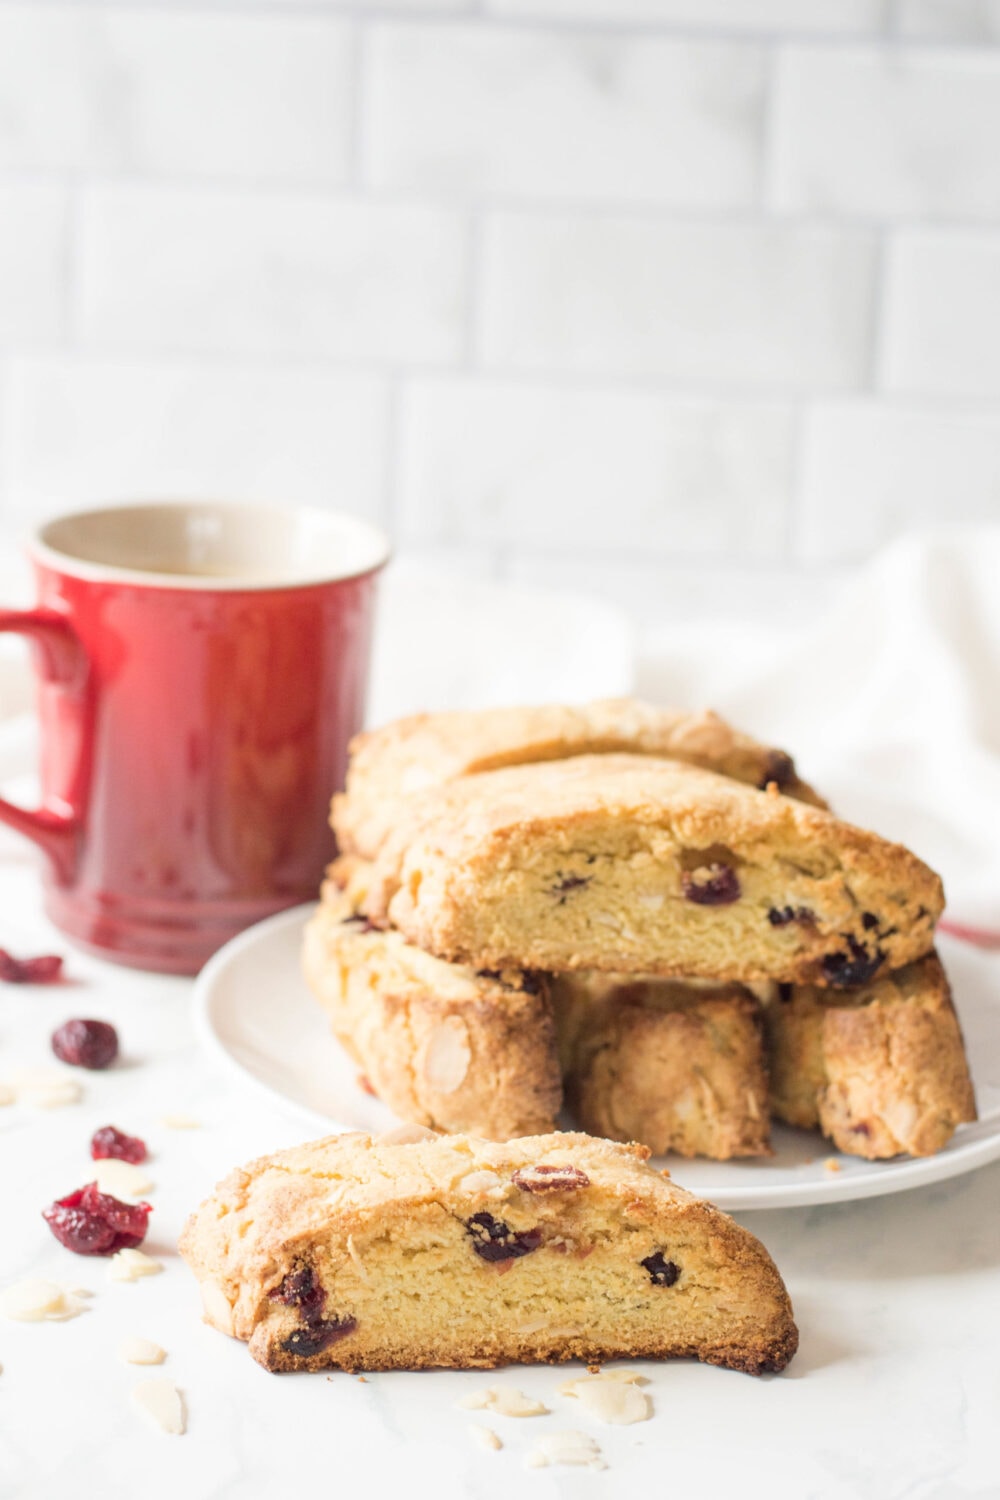 This recipe for Cranberry Almond Biscotti is out of this world and SO easy to whip-up. Enjoy it with a delicious latte first thing in the morning!